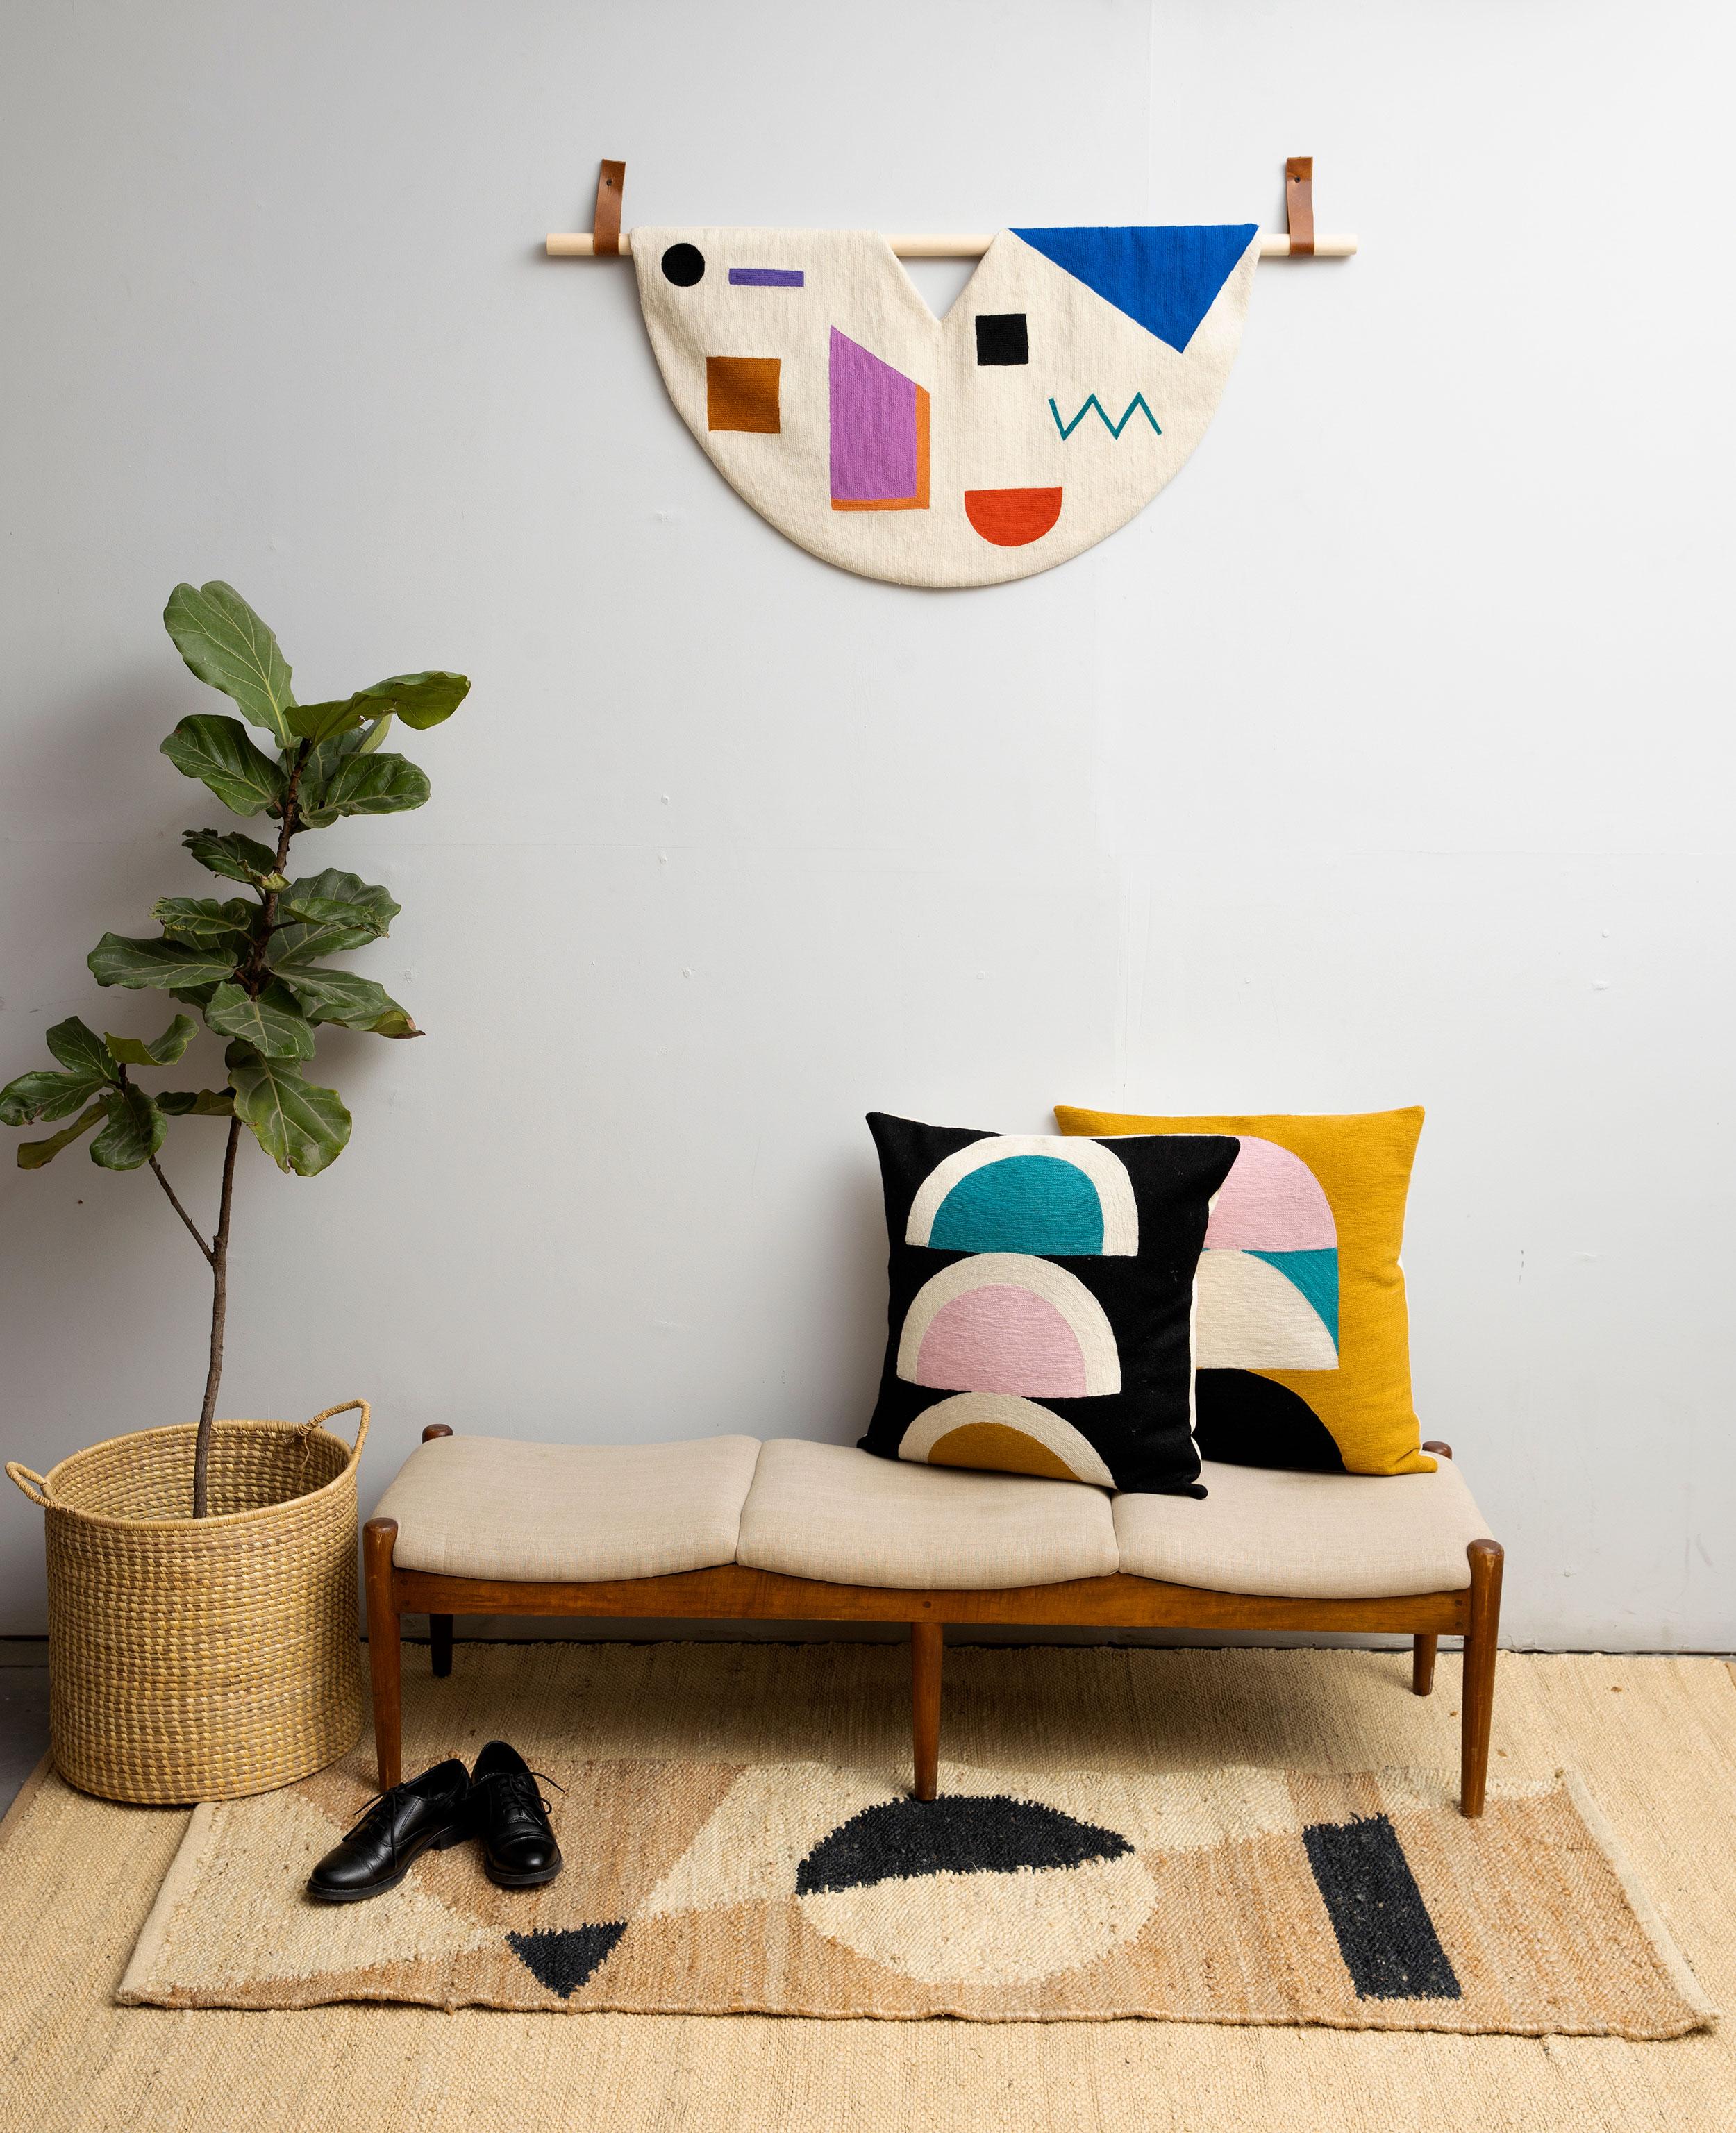 This modern, geometric tapestry has been ethically hand embroidered by artisans in Kashmir, India, using a traditional embroidery technique which is native to this region.

The purchase of this handcrafted tapestry helps to support the artisans